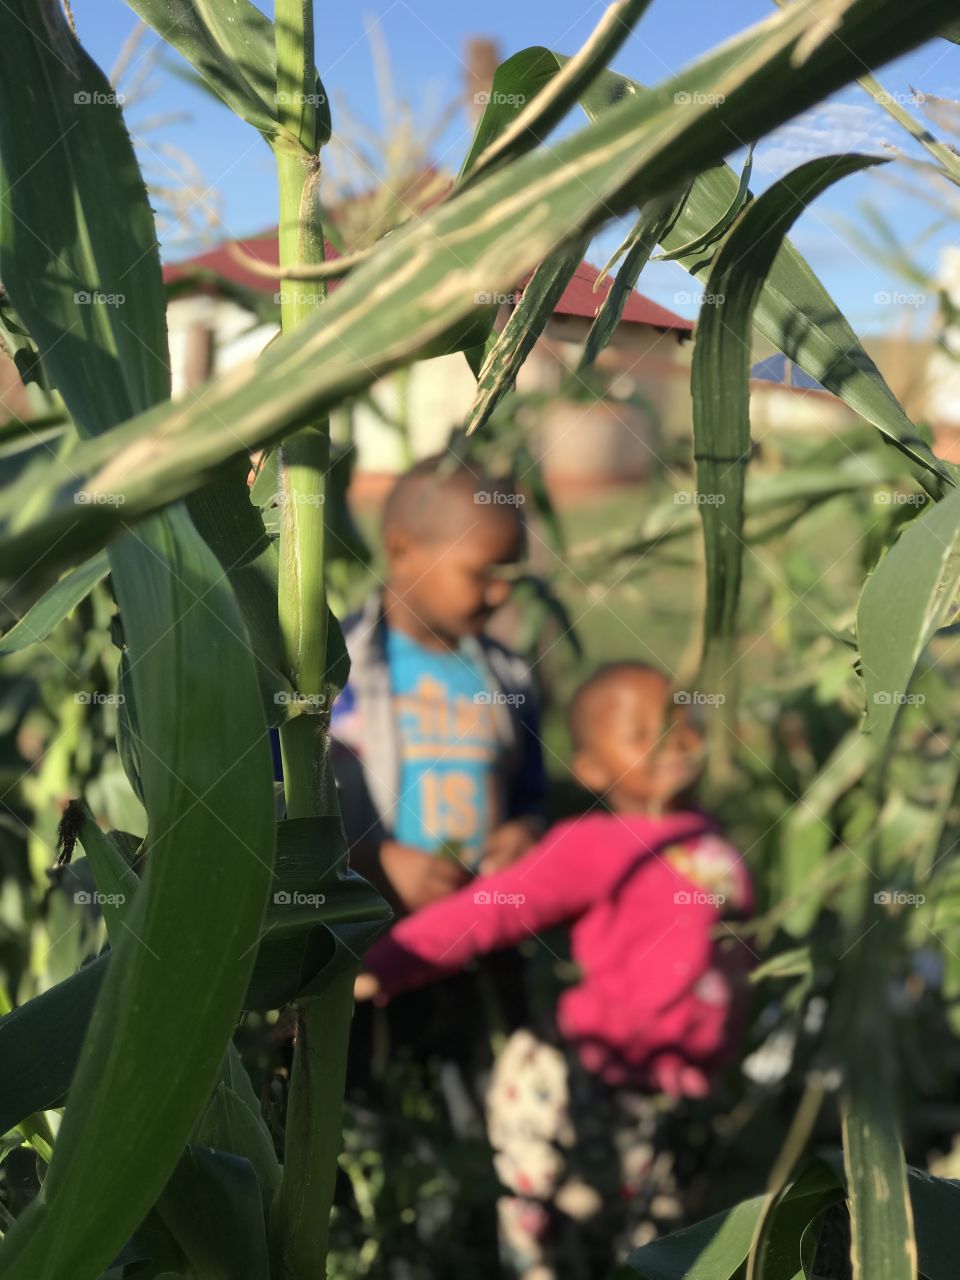 Two children playing in a corn field in rural South Africa